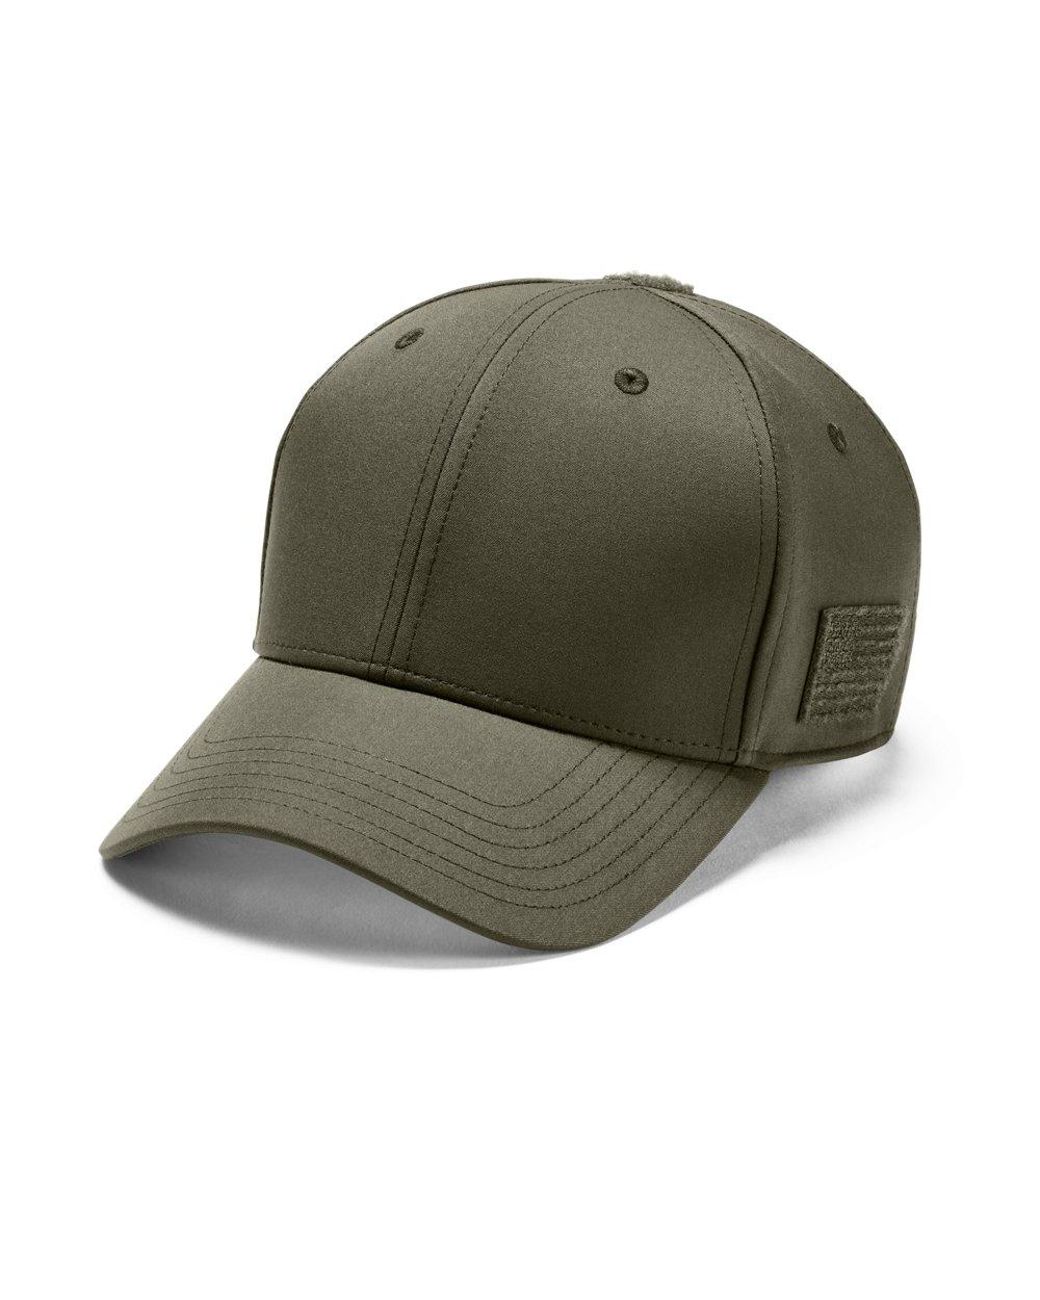 Under Armour Tactical Friend Or Foe 2.0 Cap in Green for Men